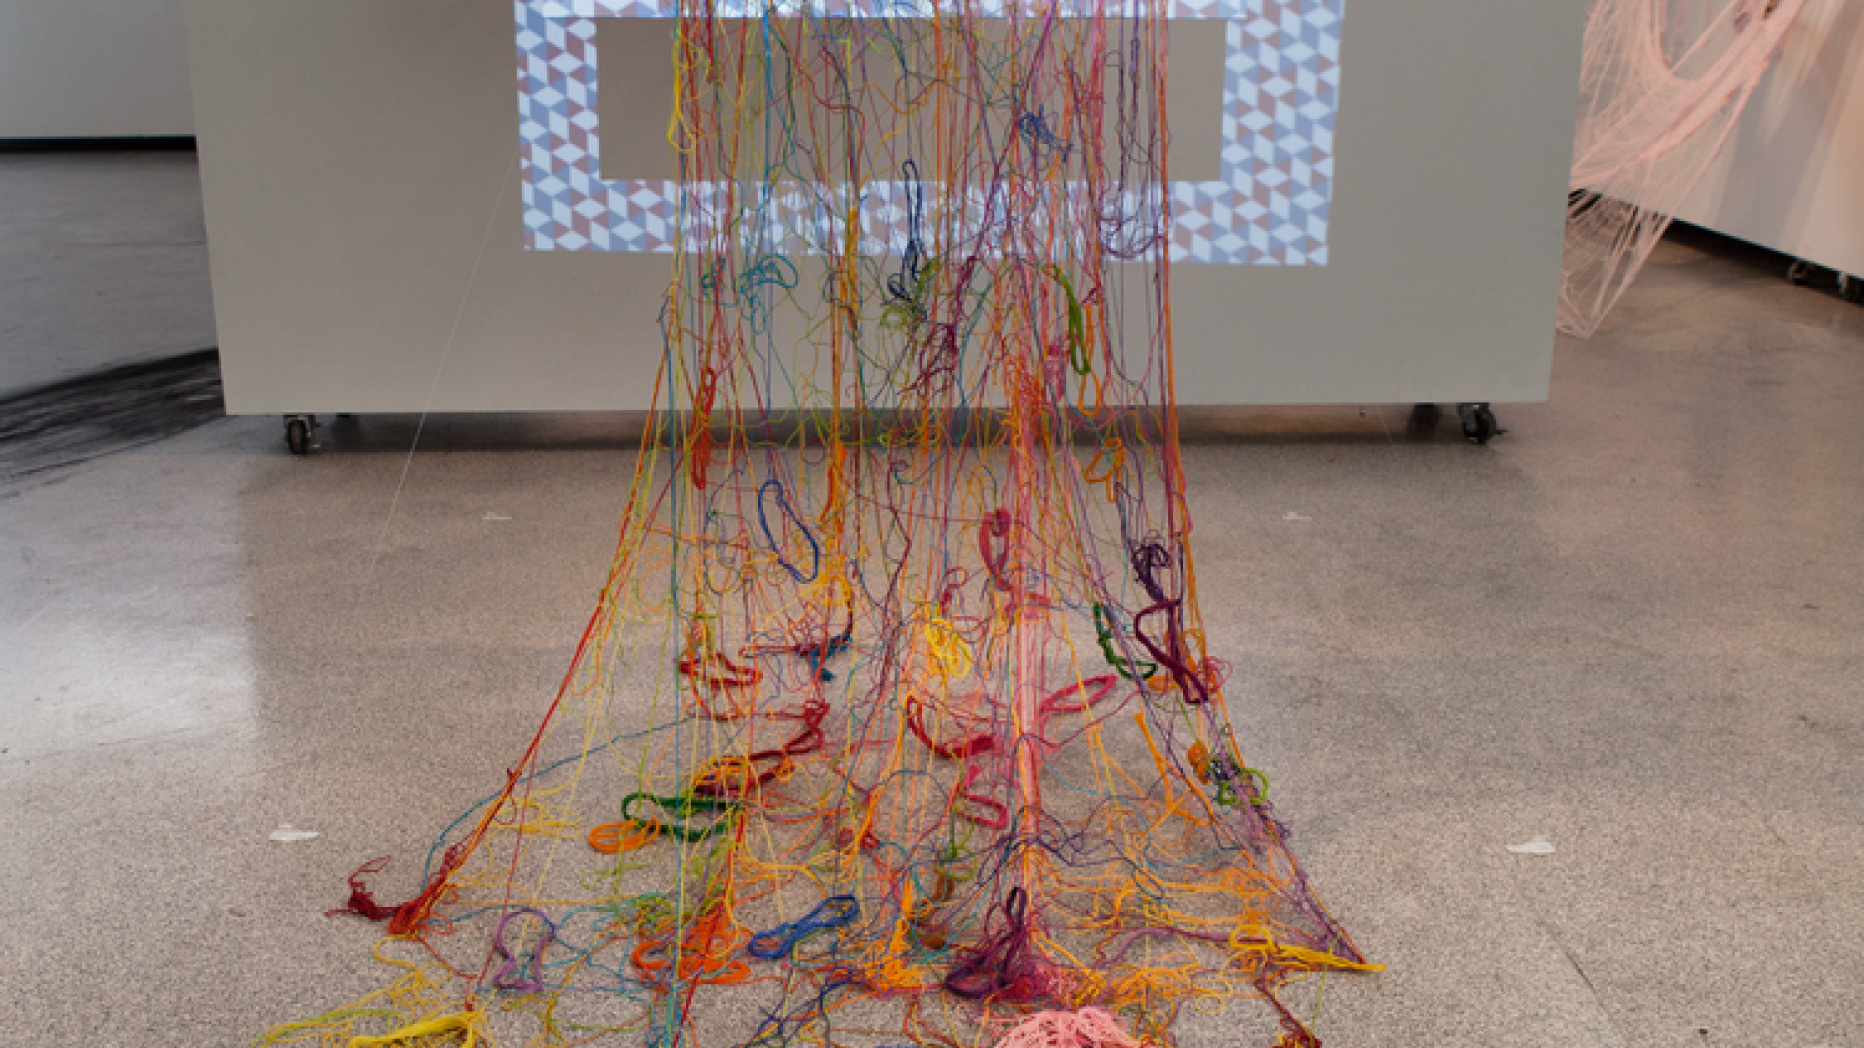 Art piece featuring pieces of yarn connected to a board being spread out in a messy fashion across the floor